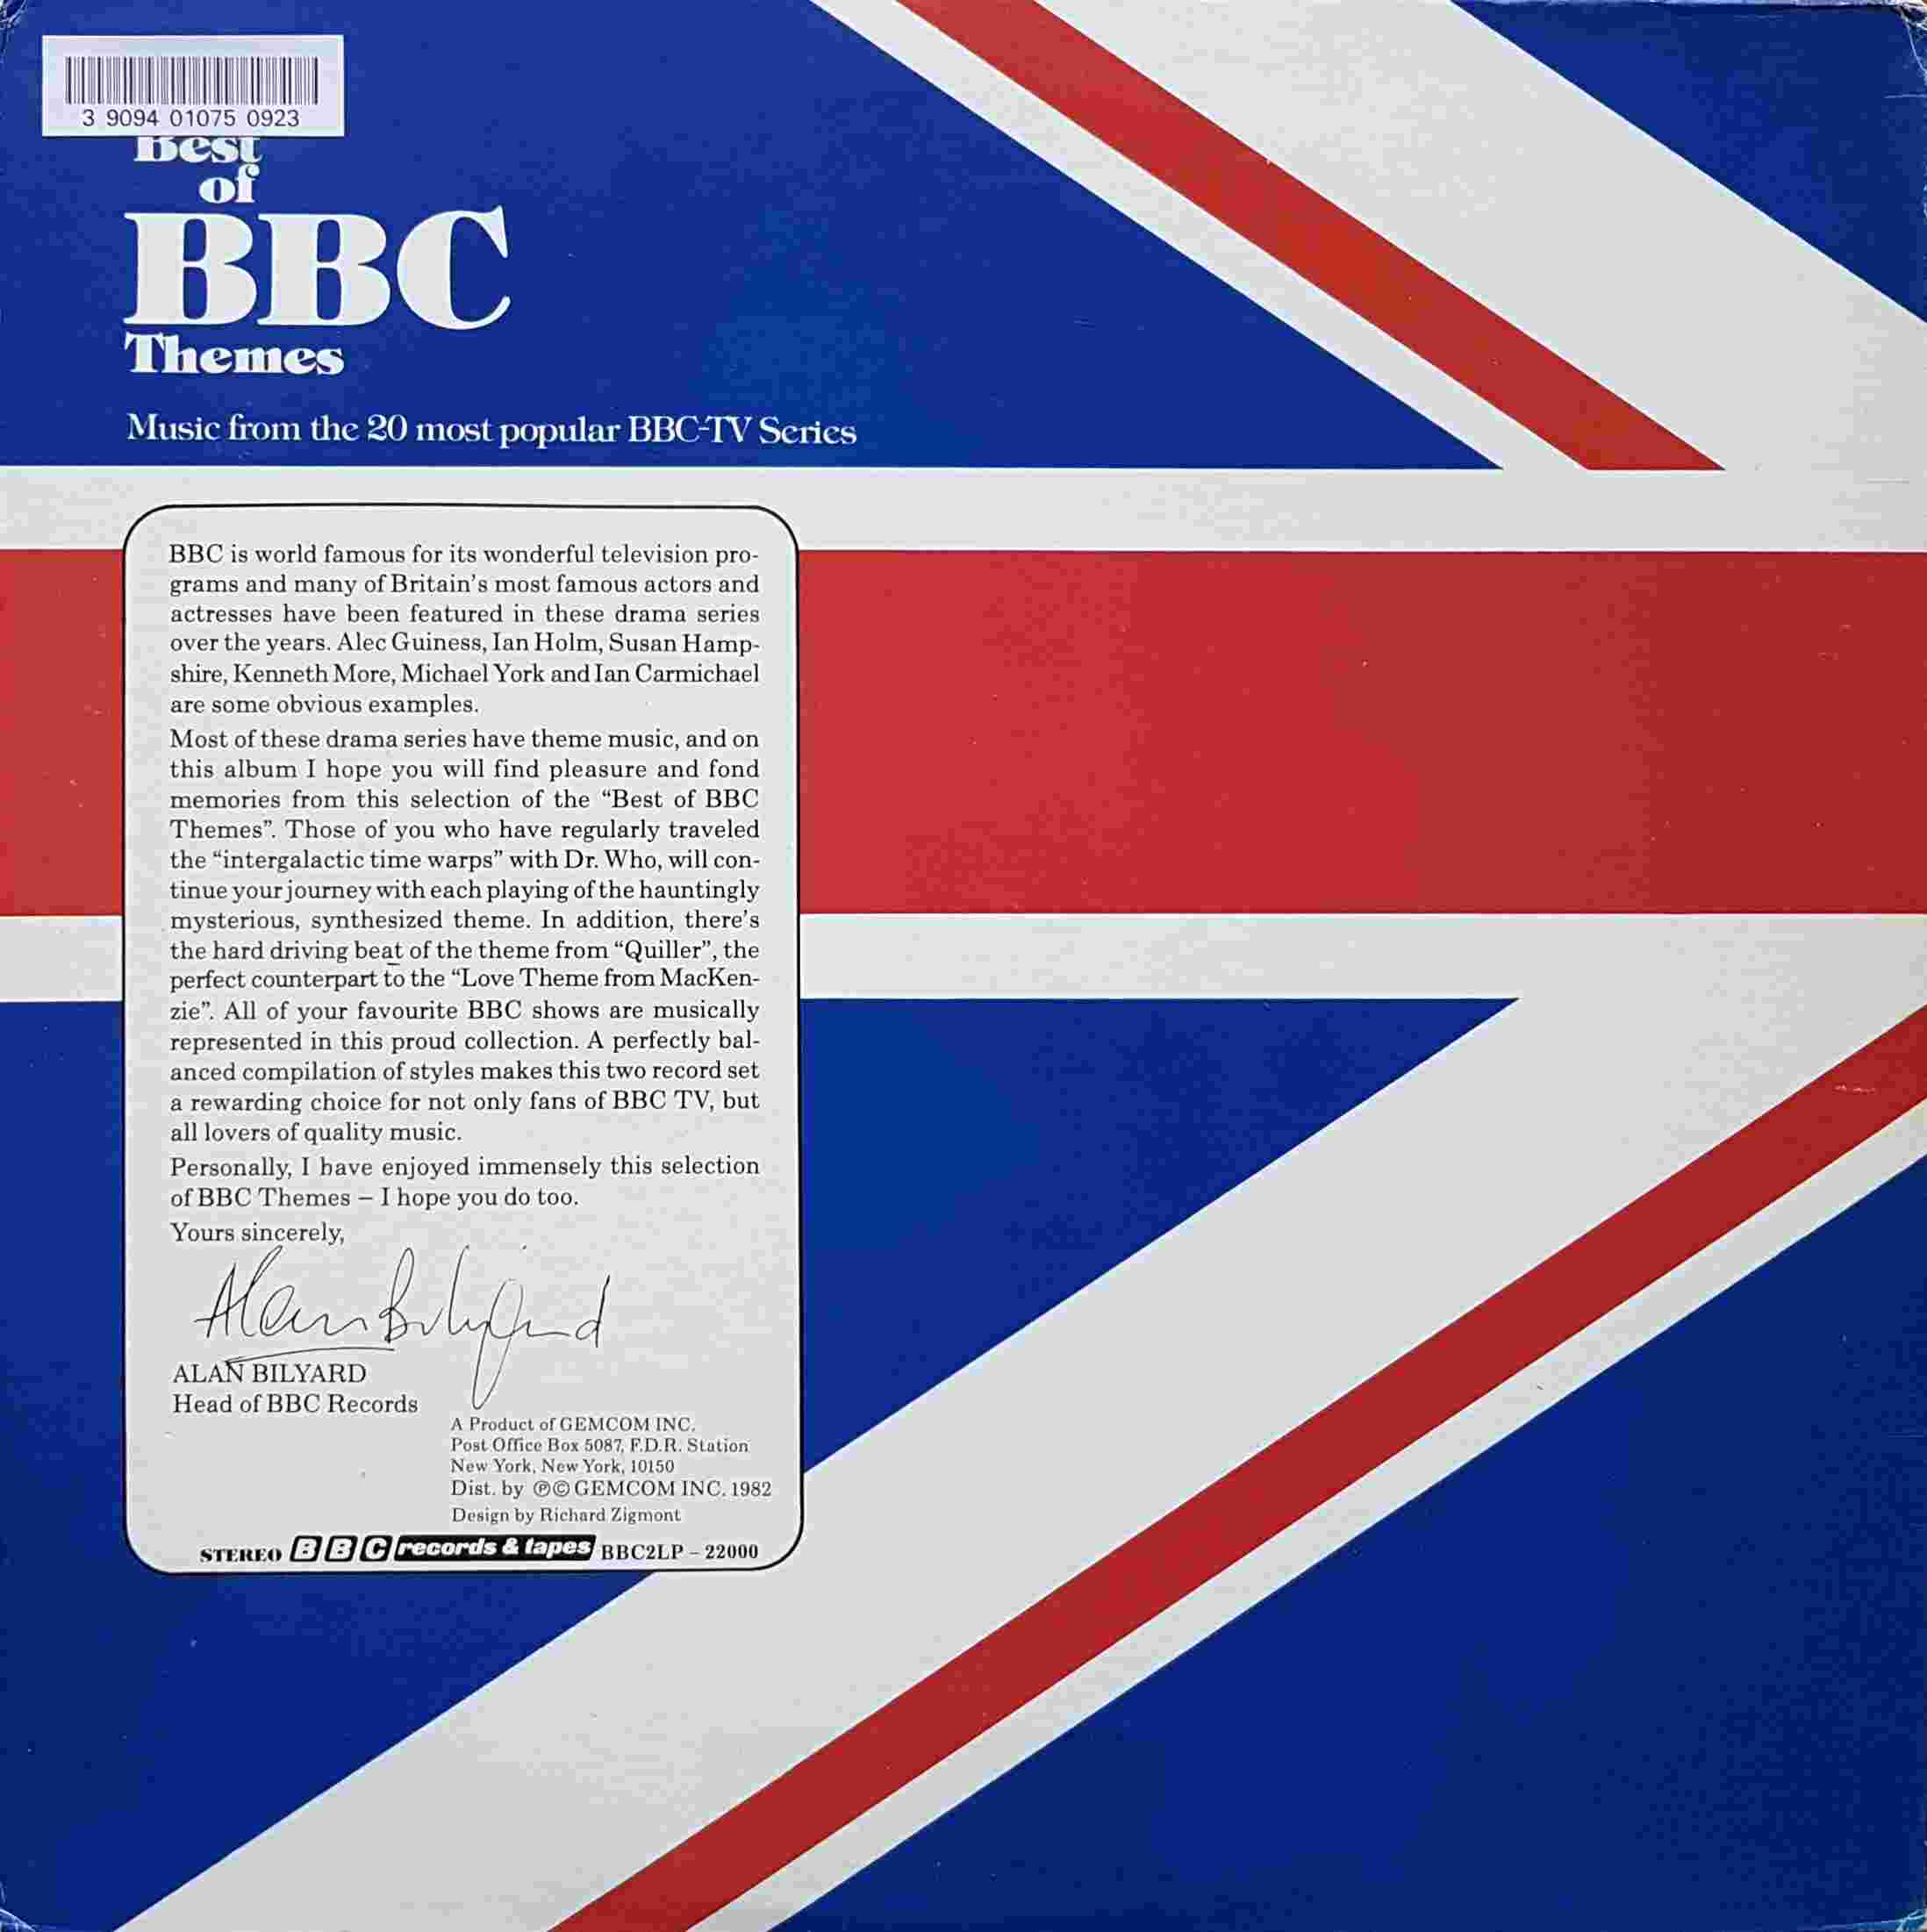 Picture of BBC2LP-22000 Music from the 20 most popular BBC TV series by artist Various from the BBC records and Tapes library